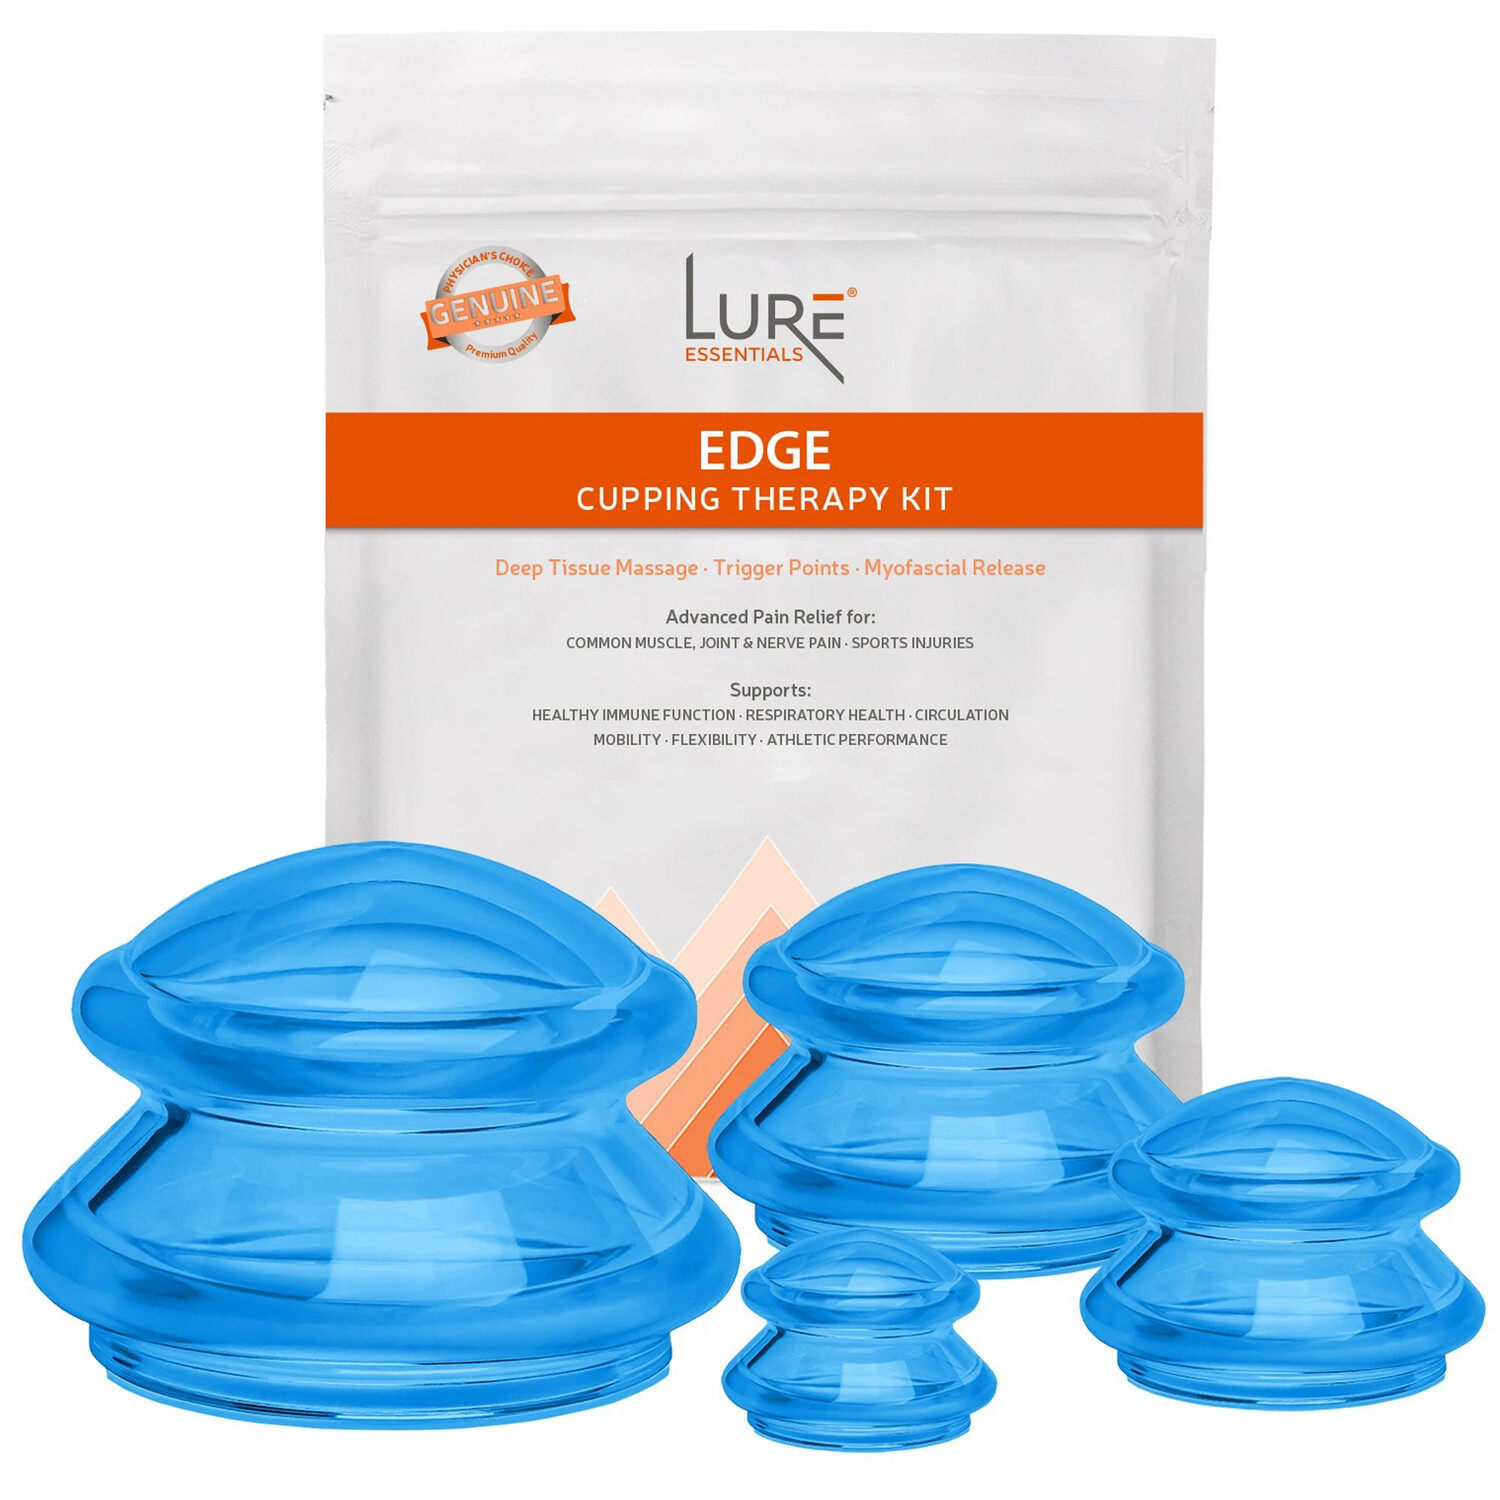 EDGE™ Cupping Set of 4 - Blue